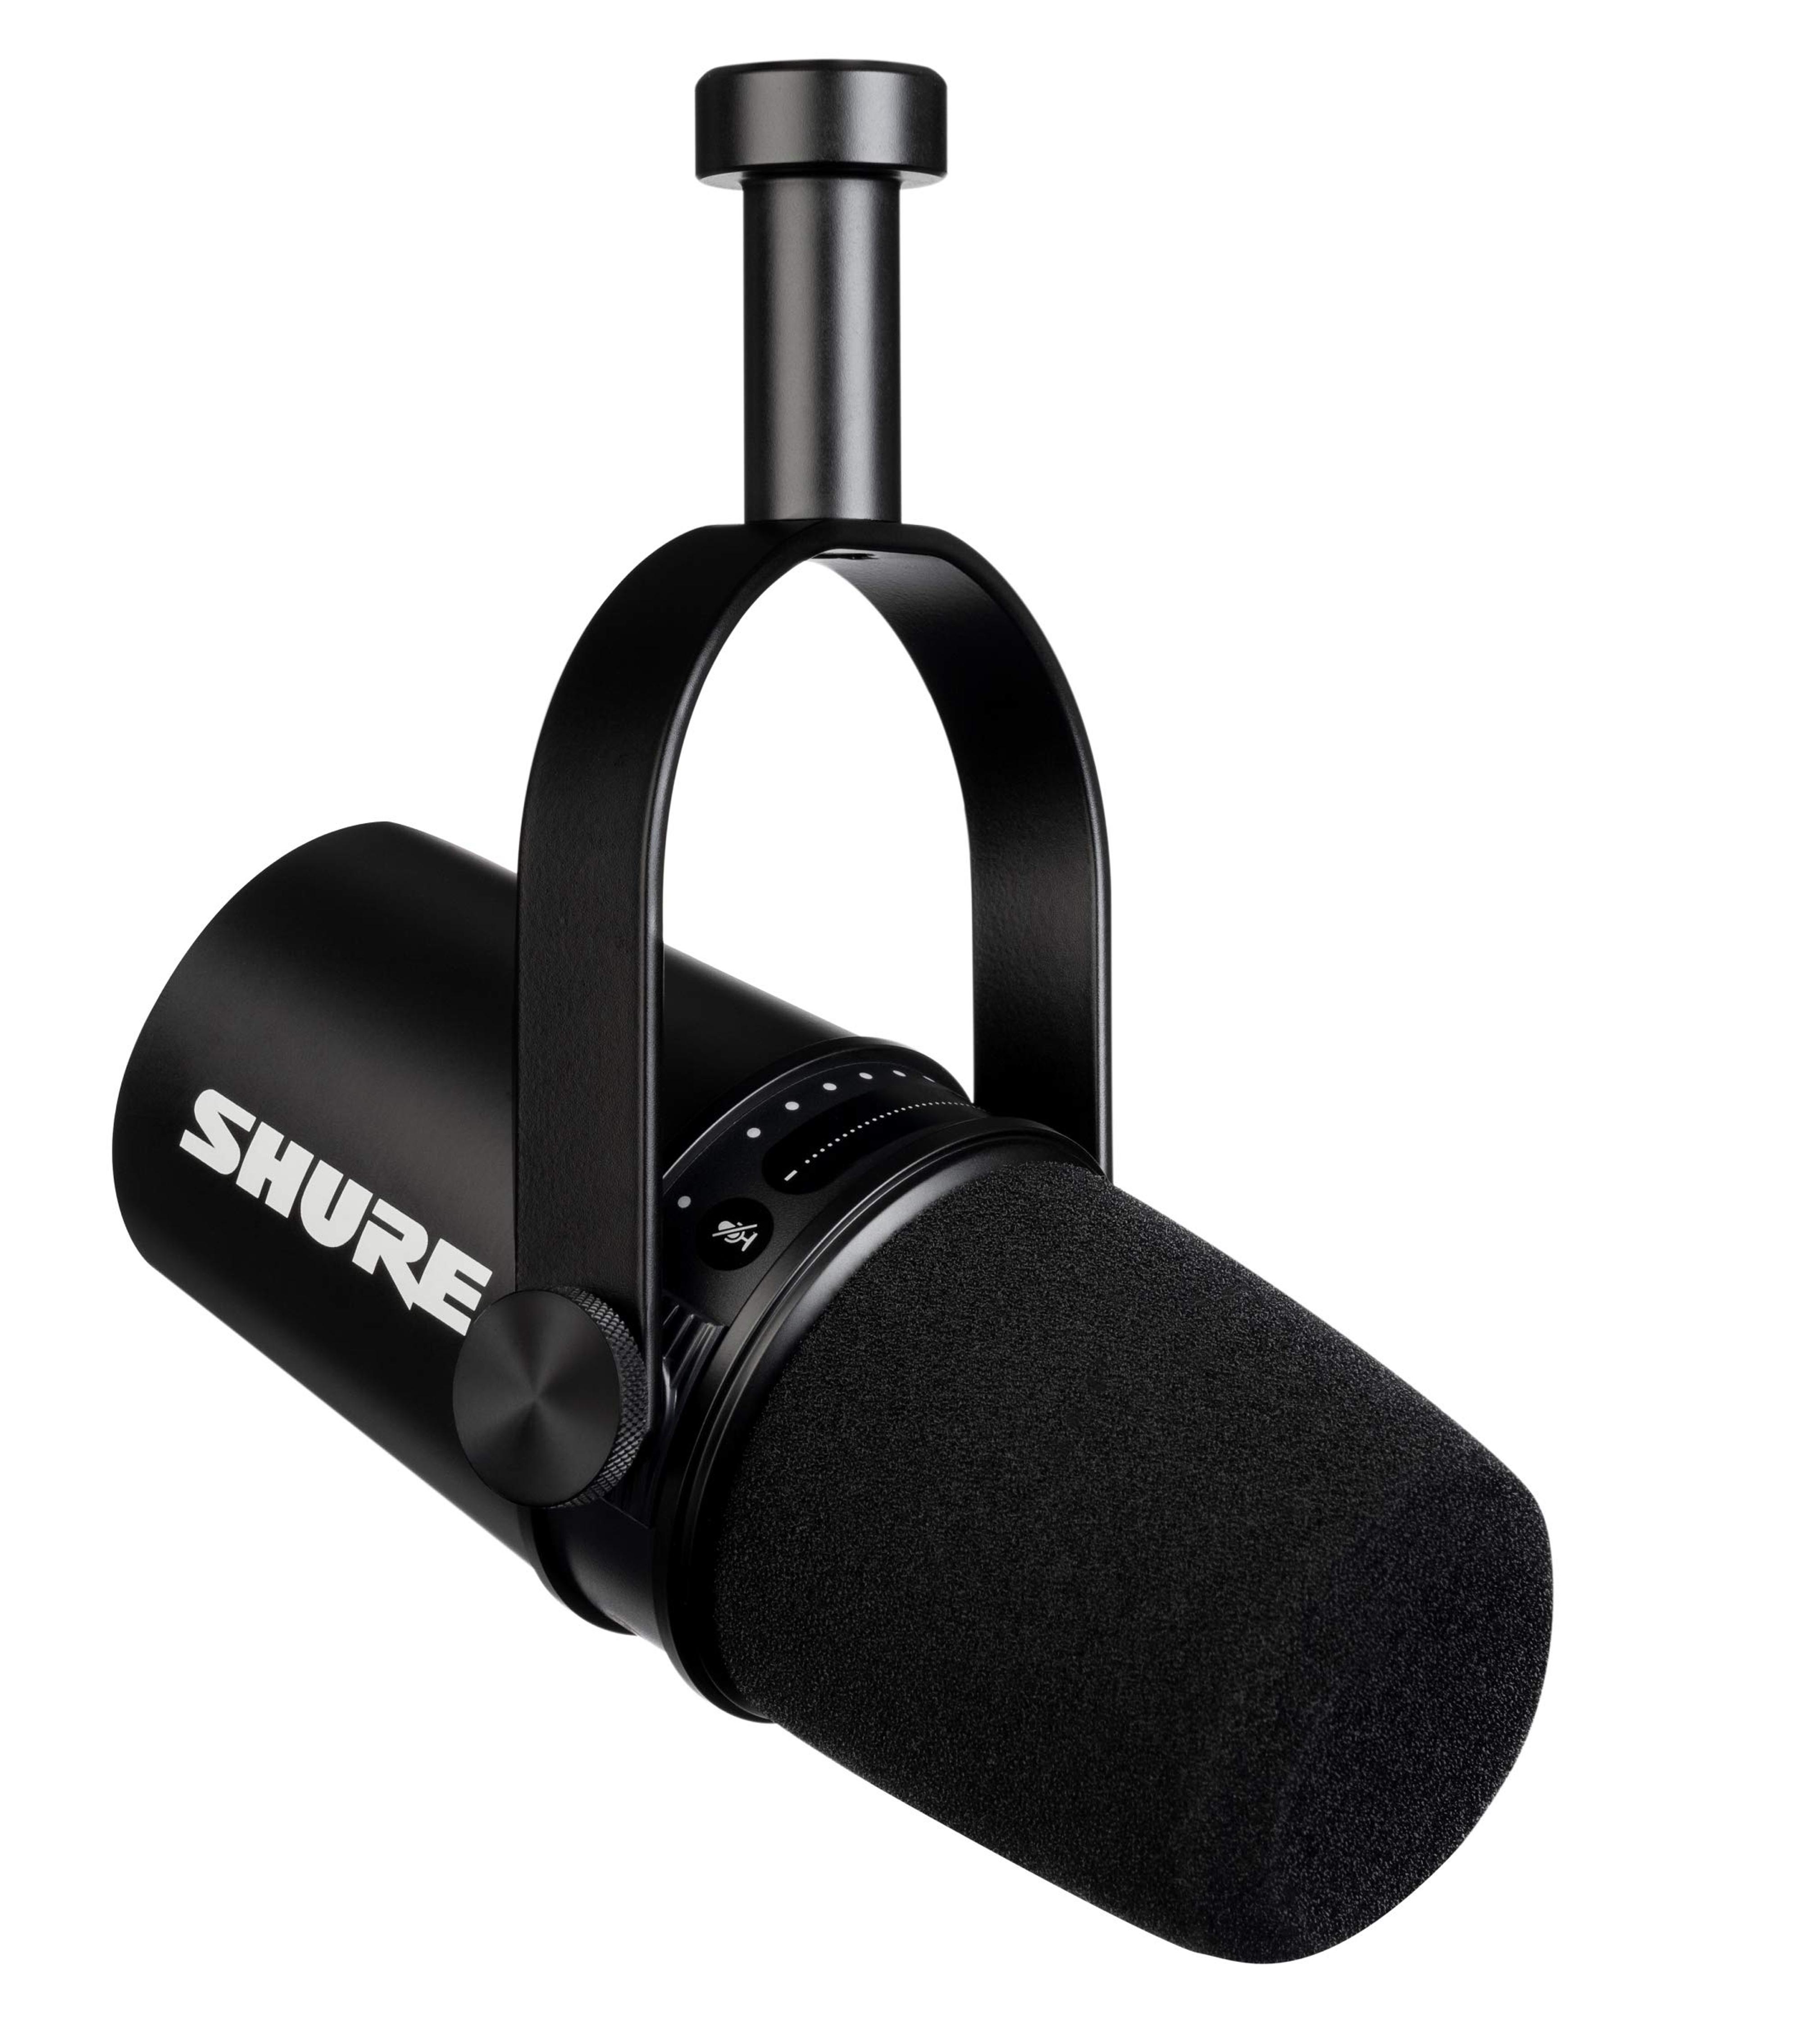 Amazon.com: Shure MV7 USB Microphone for Podcasting, Recording, Live Streaming & Gaming, Built-in Headphone Output, All Metal USB/XLR Dynamic Mic, Voice-Isolating Technology, TeamSpeak & Zoom Certified – Black : Musical Instruments